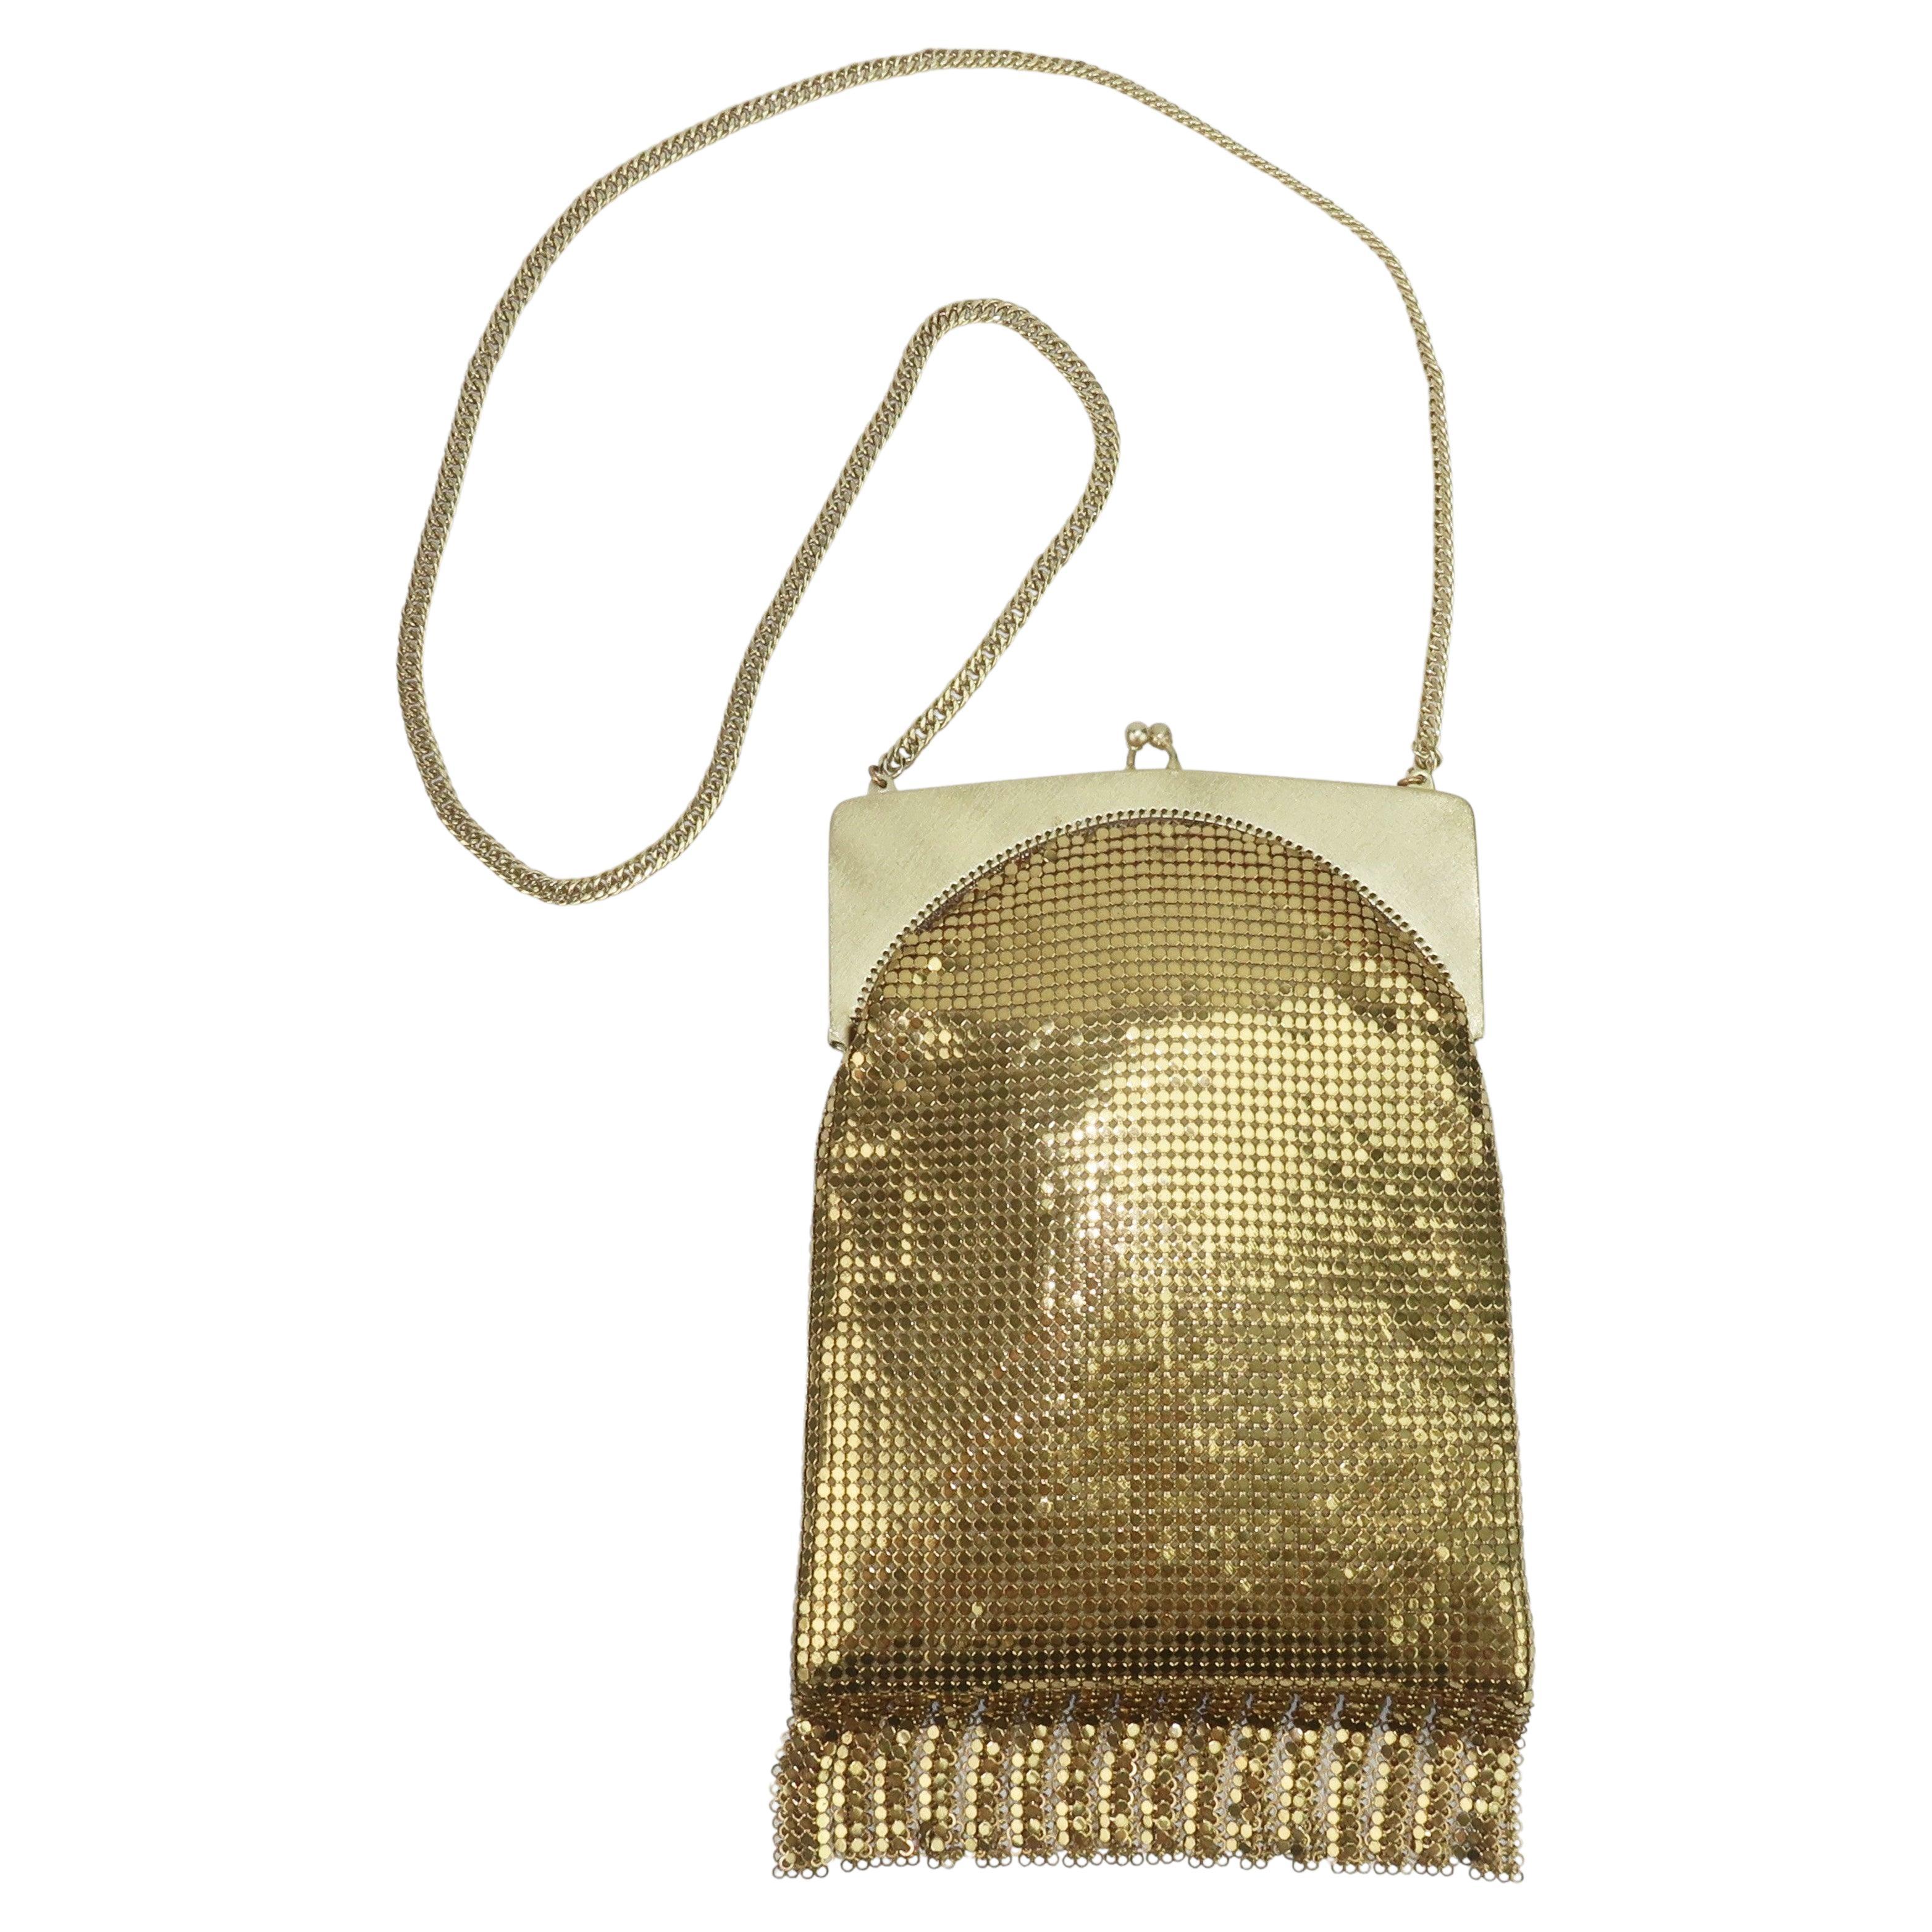 Chain Mesh Purse Vintage - 15 For Sale on 1stDibs